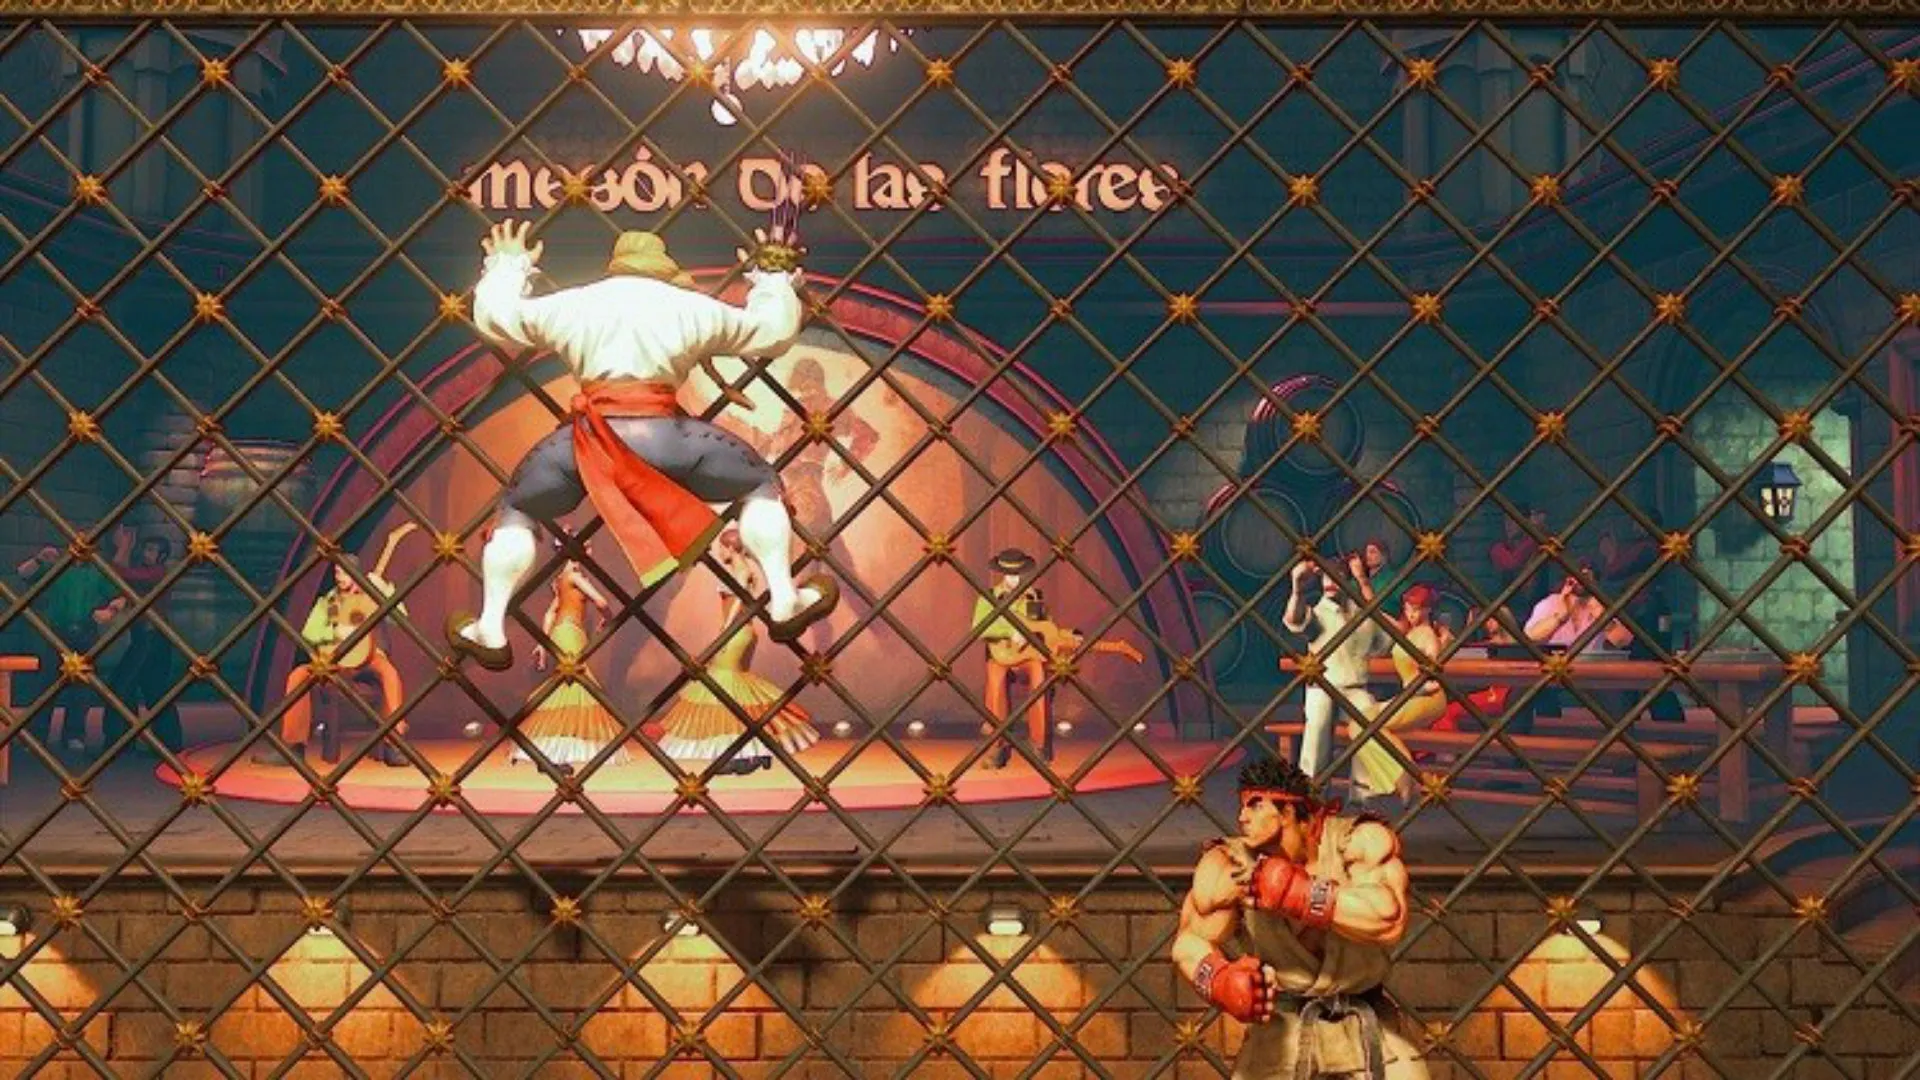 Vega's Street Fighter II stage, Ed, and balance update coming to